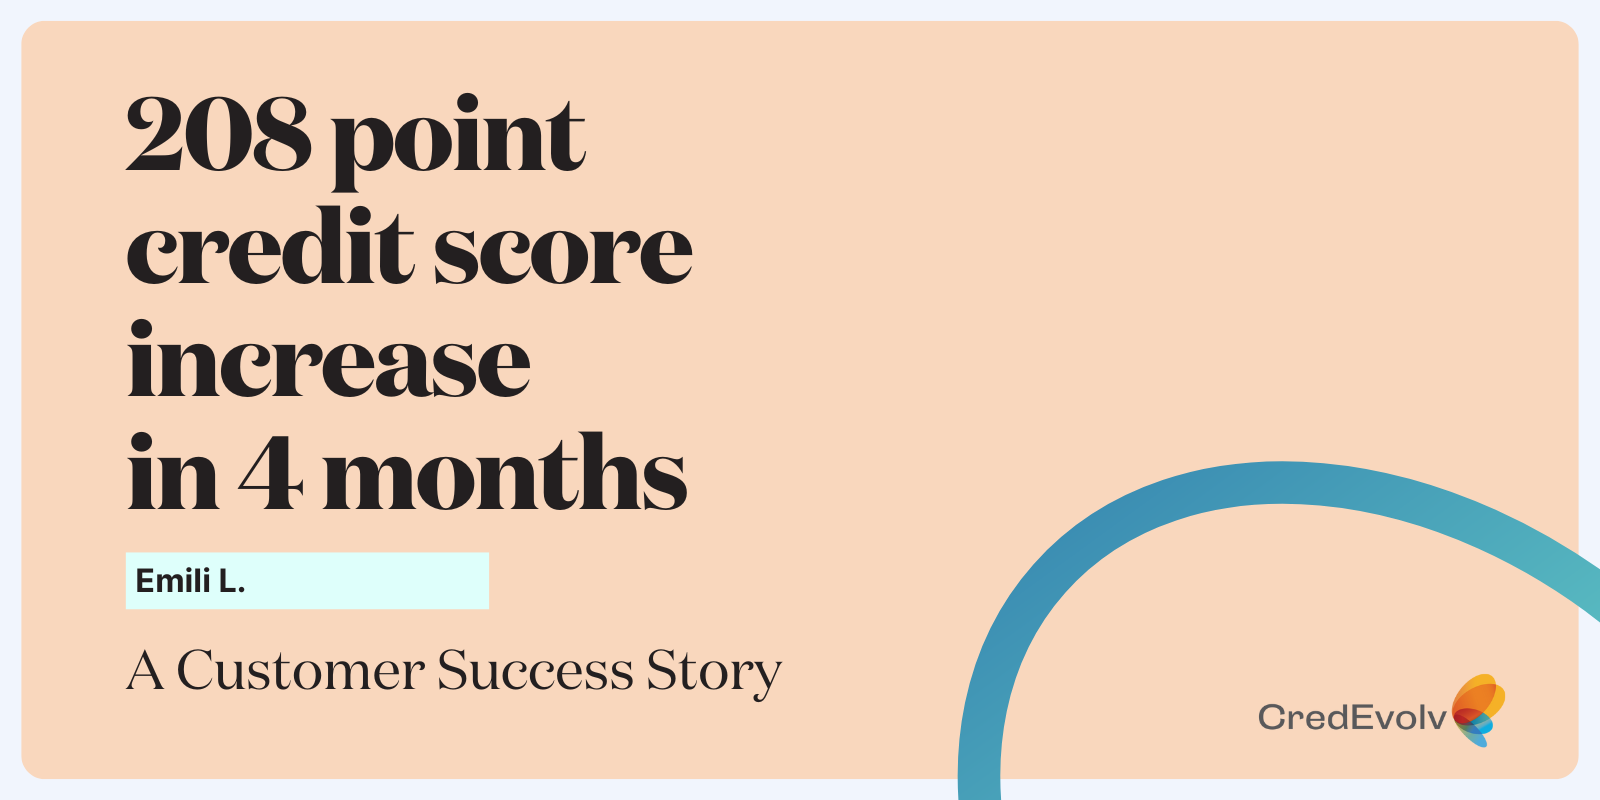 Credit Success Story - 208 point credit score increase in 4 months - blog graphic